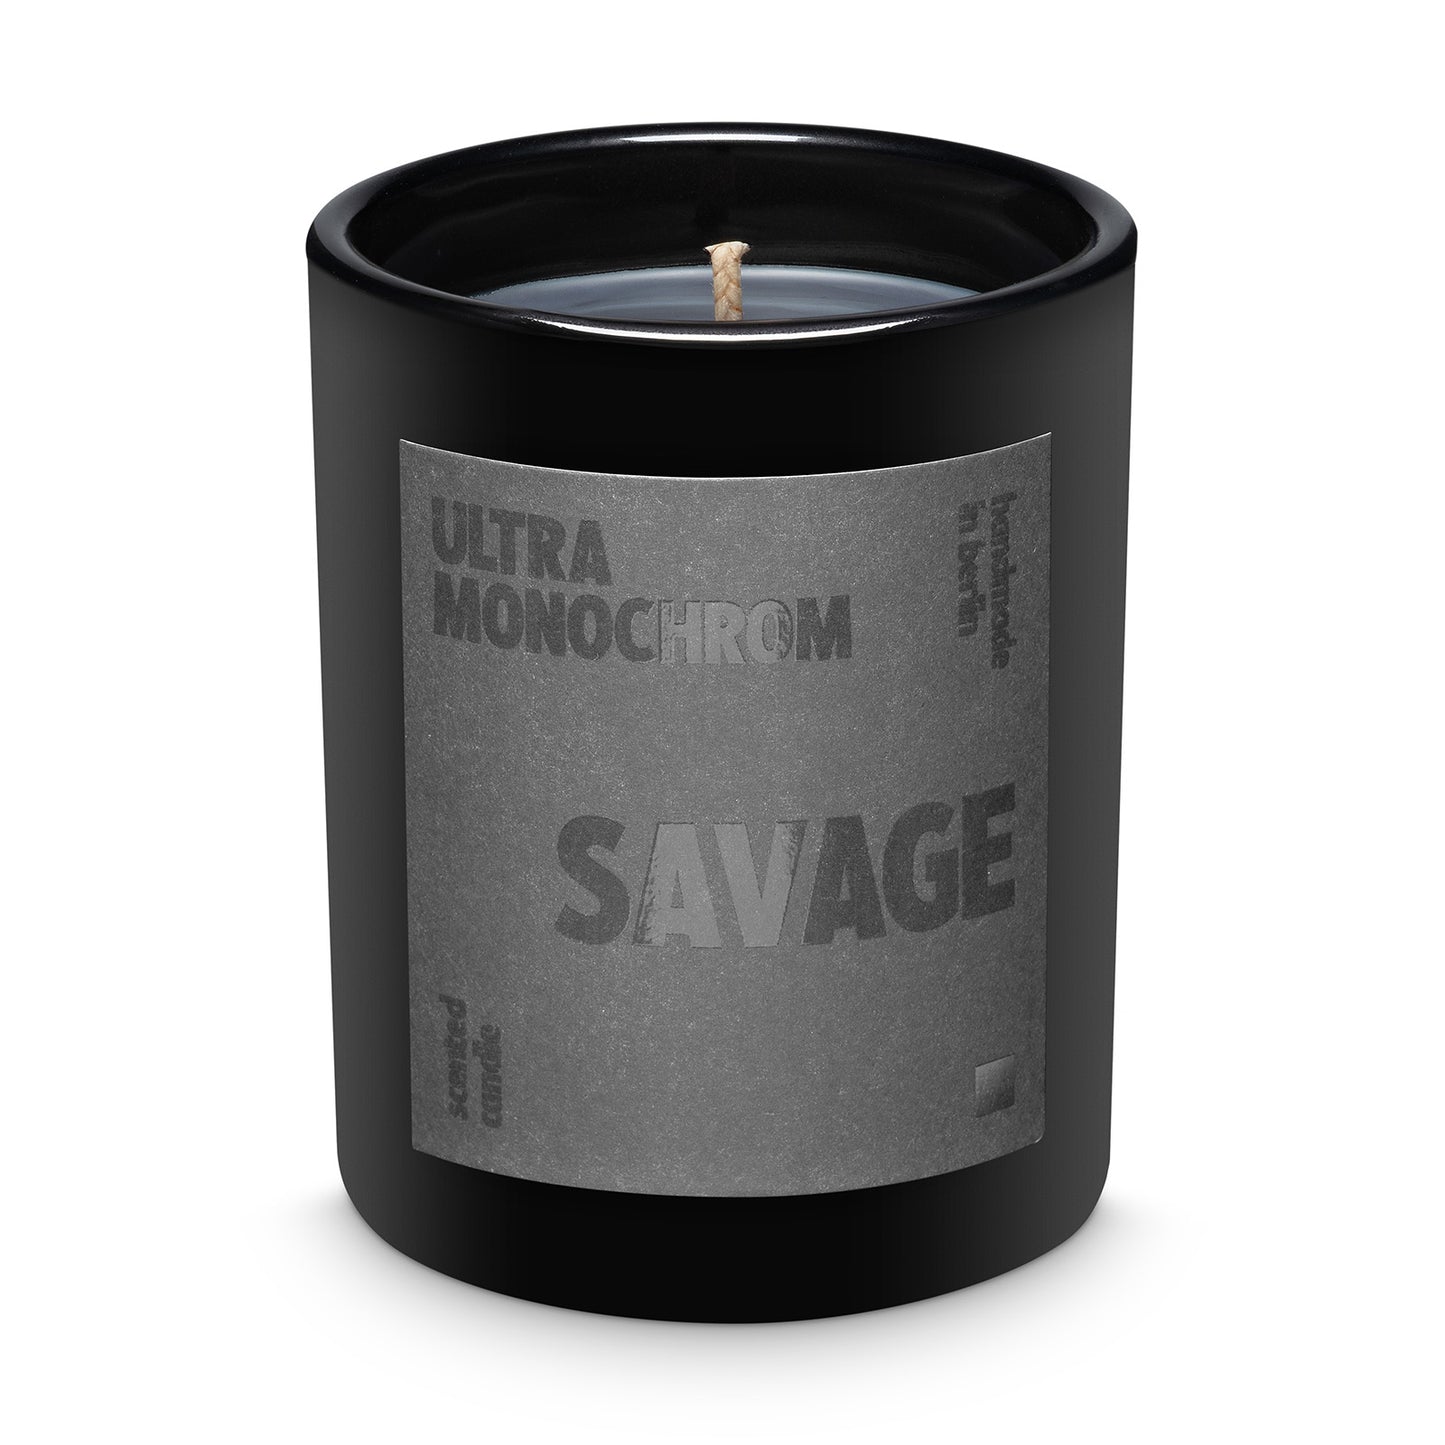 Ultramonochrom savage scented soy candle.